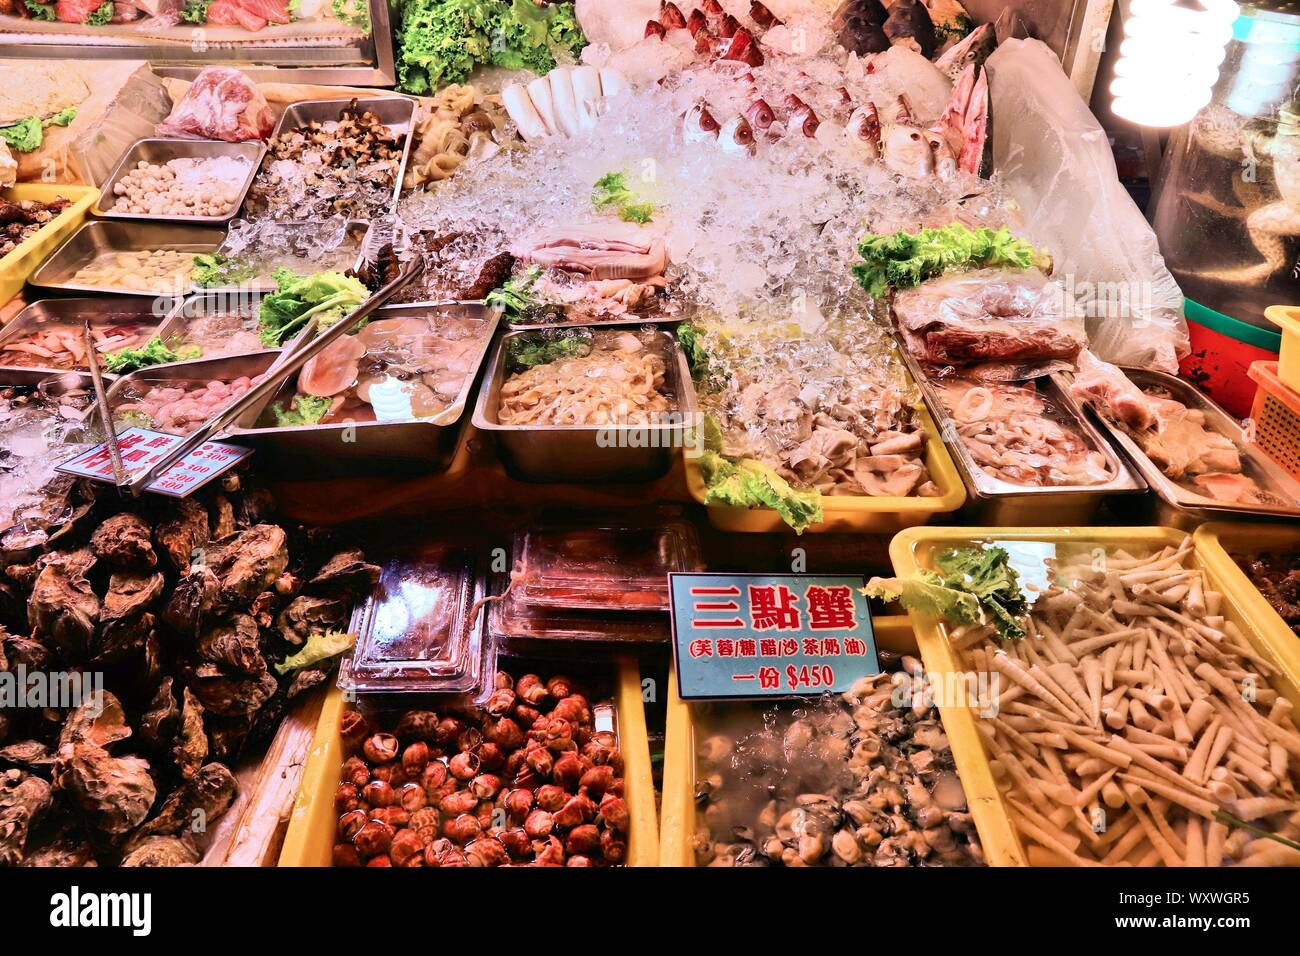 KEELUNG, TAIWAN - NOVEMBER 22, 2018: Sea food selection at famous Miaokou Night Market in Keelung, Taiwan. Night markets are essential part of Taiwane Stock Photo